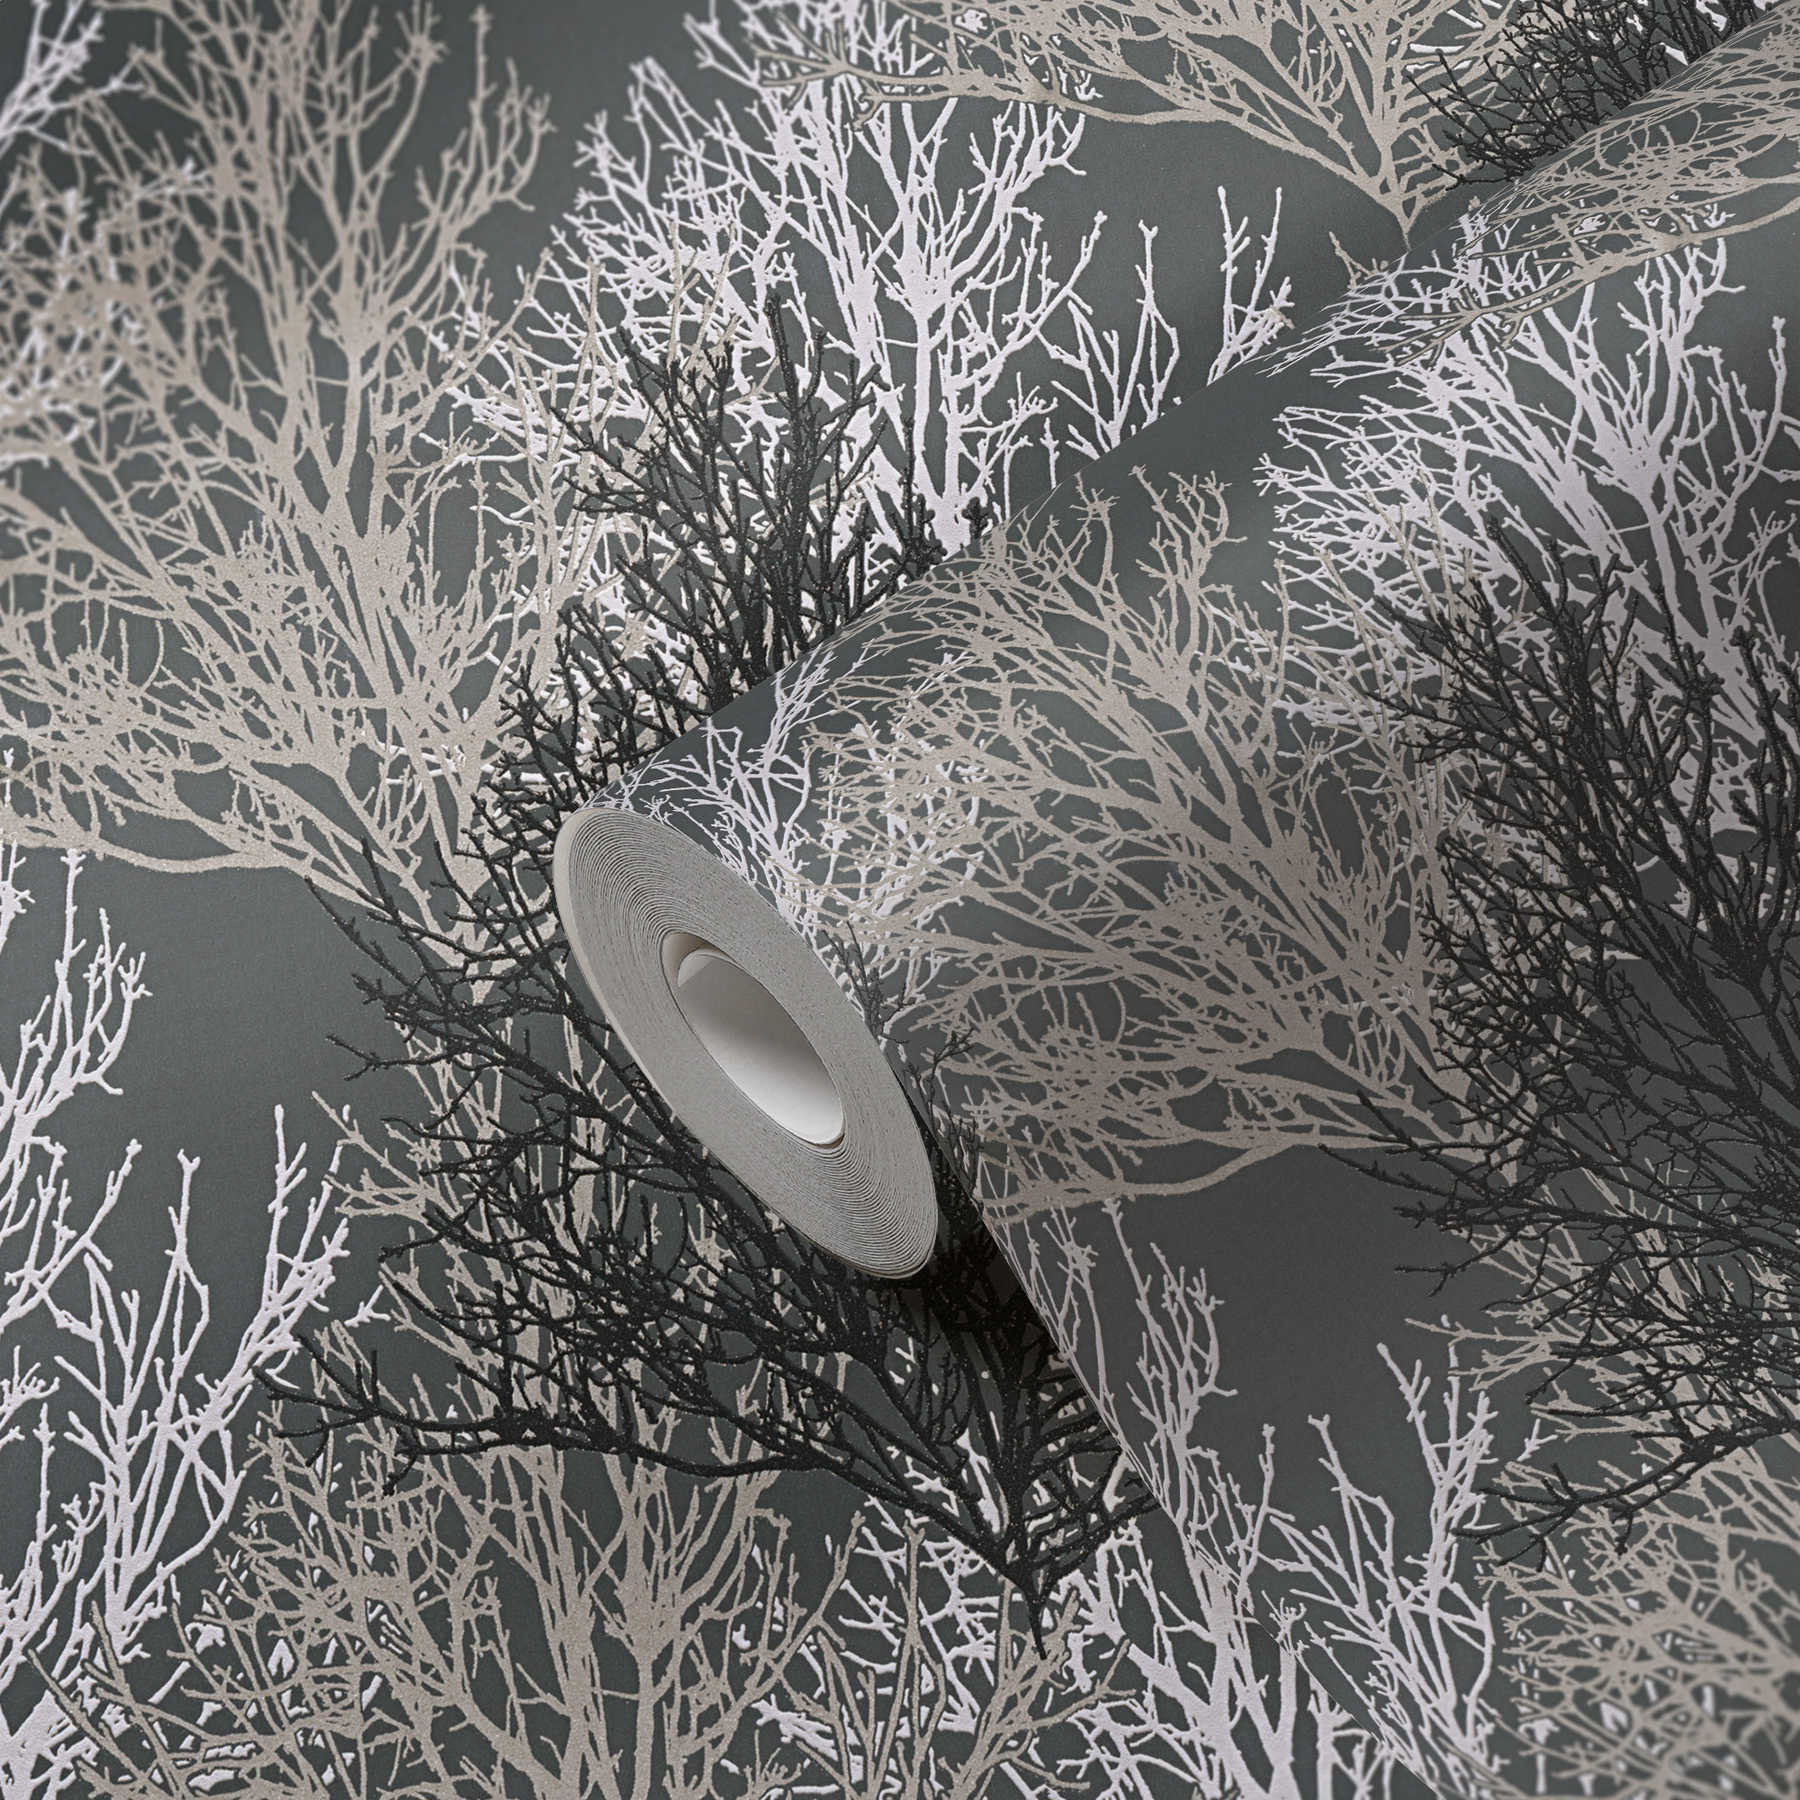             Wallpaper tree design with metallic colours & textured pattern - grey
        